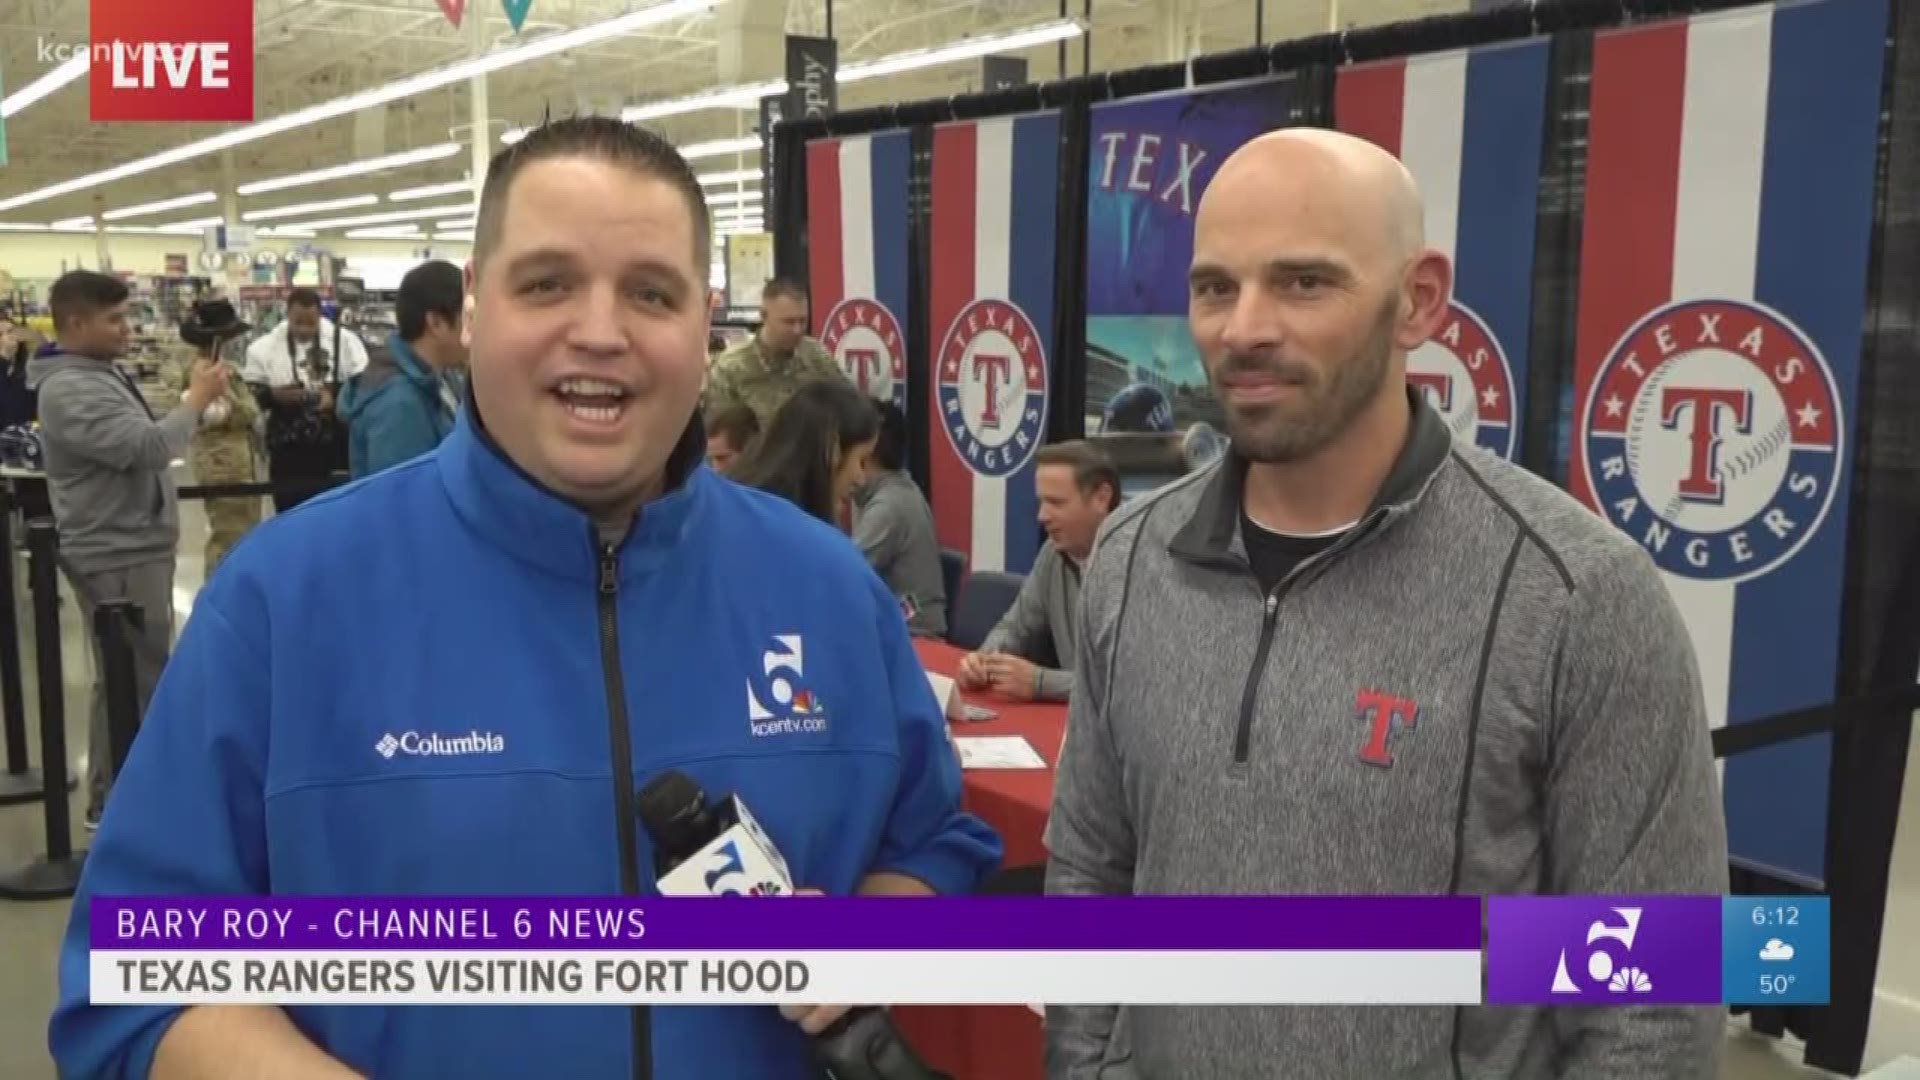 KCEN Channel 6 reporter Bary Roy chatted with manager Chris Woodard about seeing the soldiers on Fort Hood.